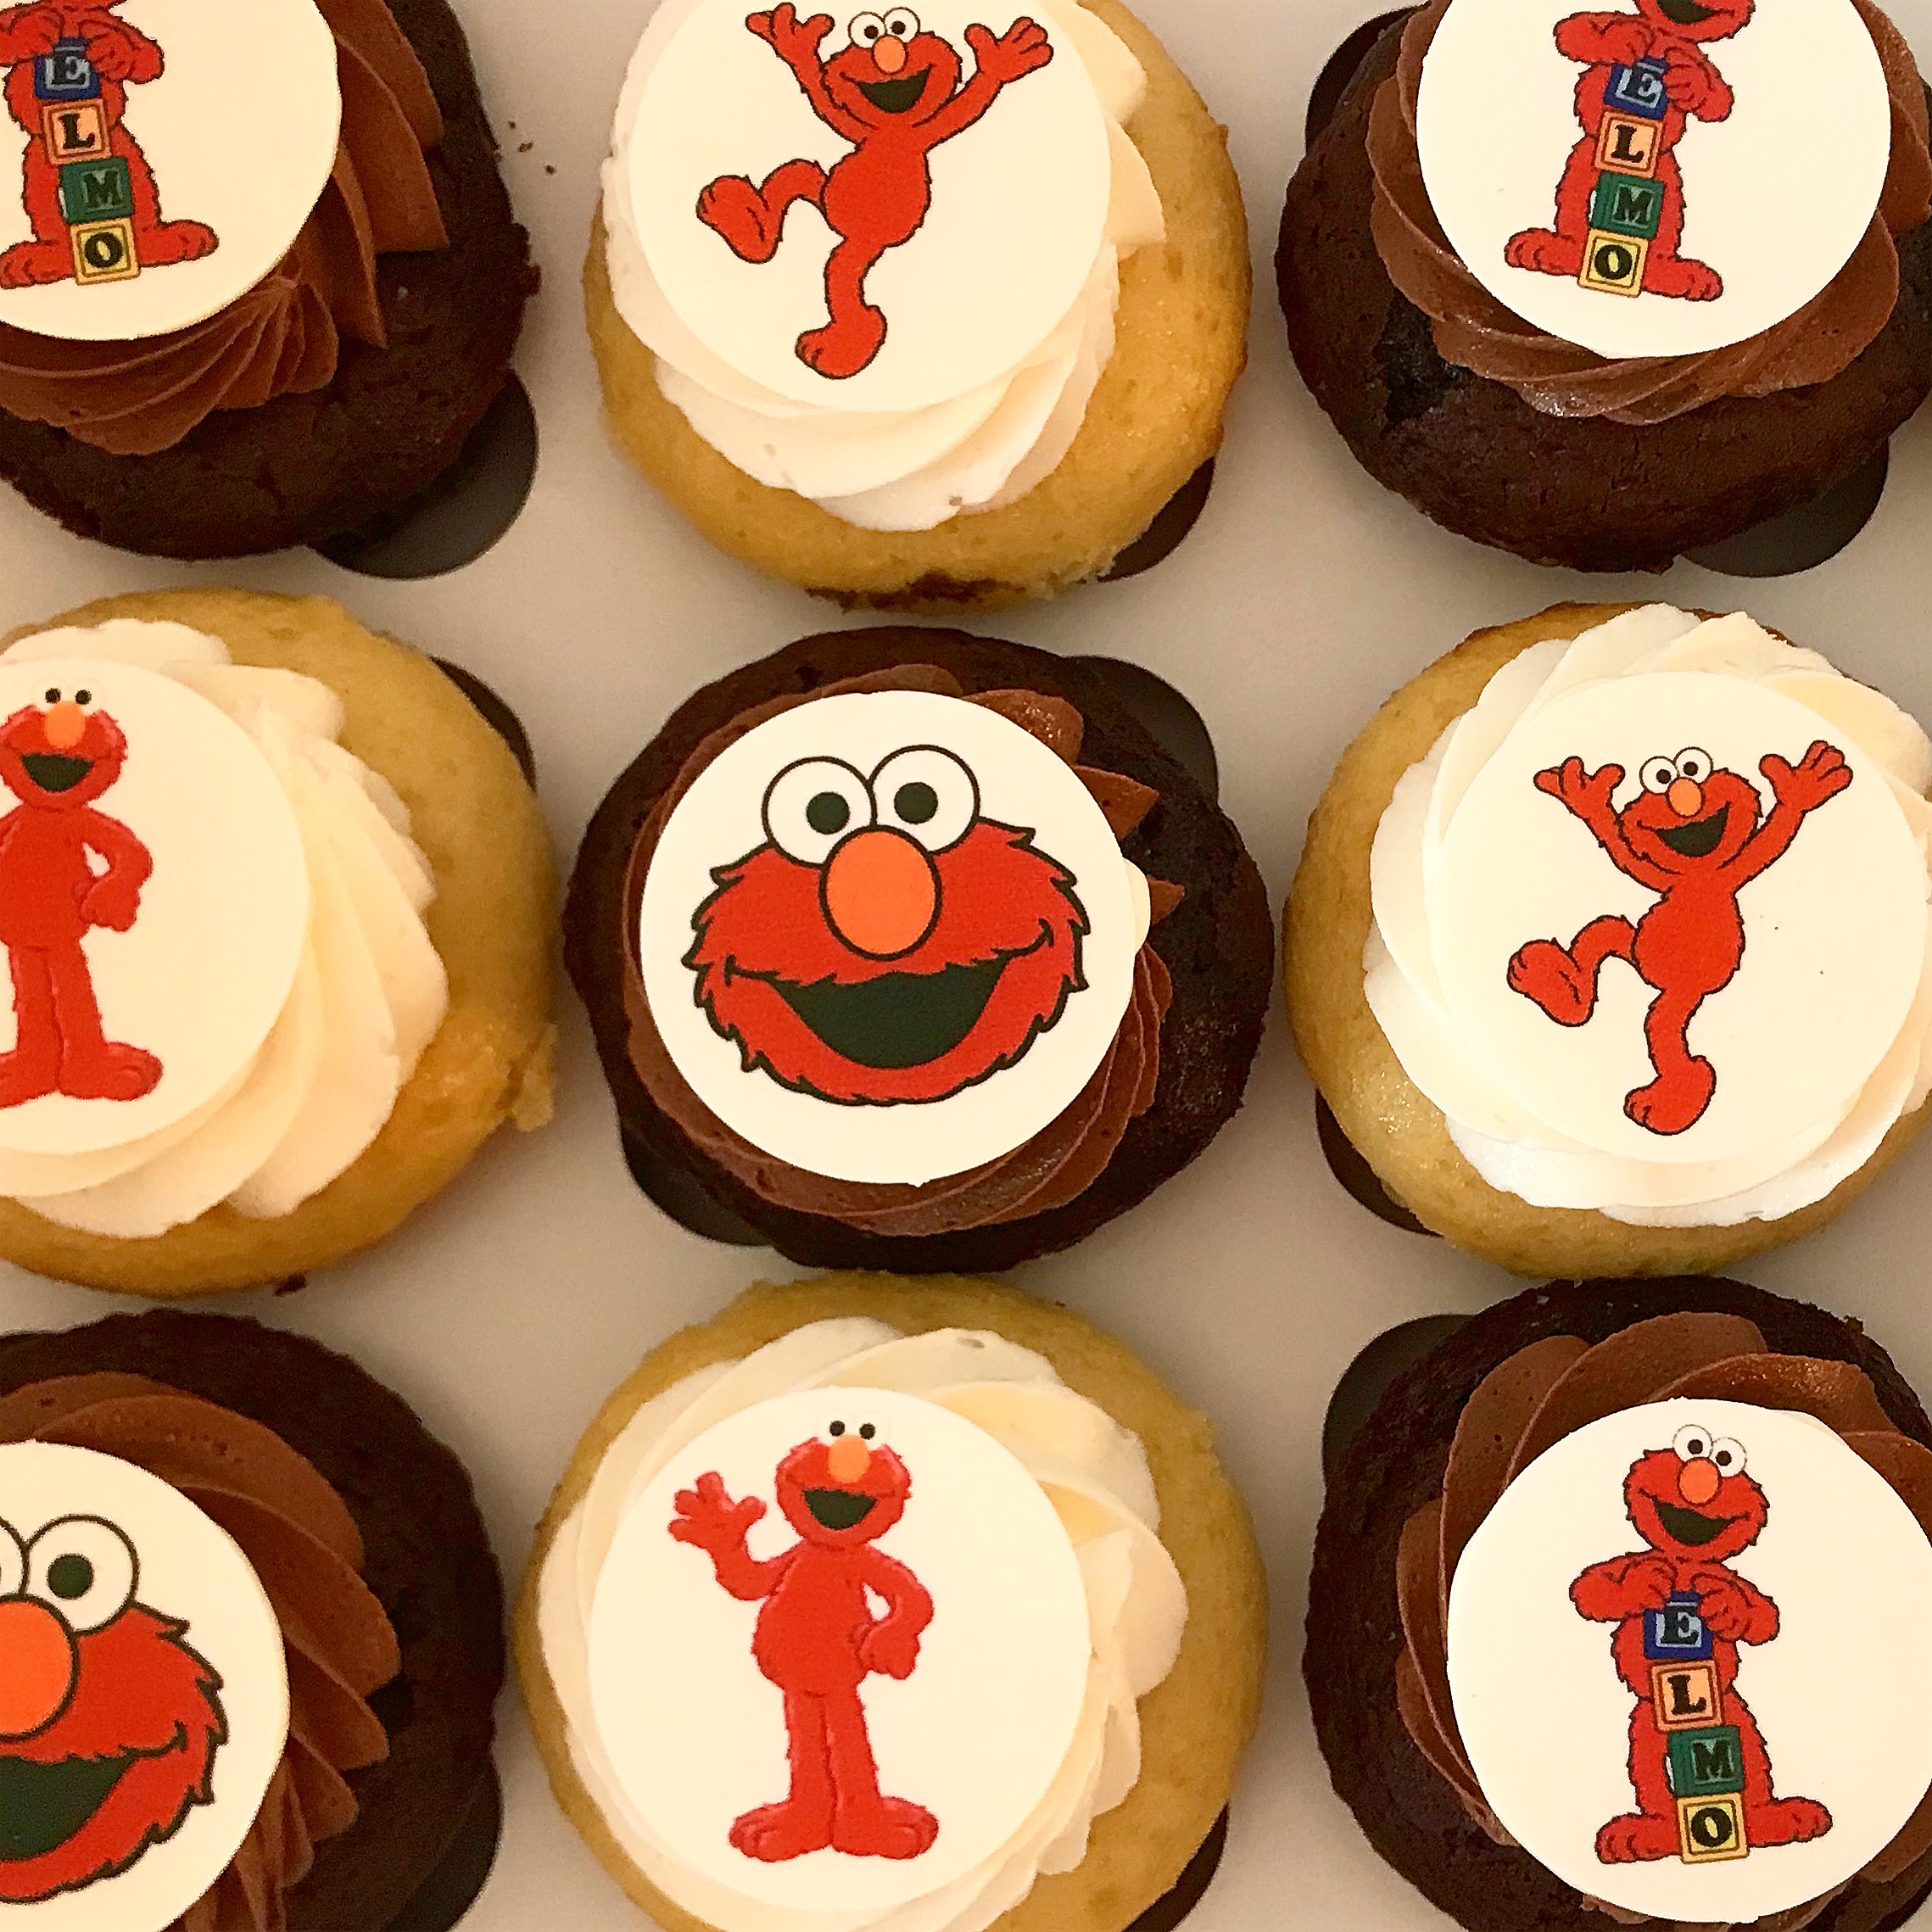 Elmo® Cupcakes – The Cupcake Delivers